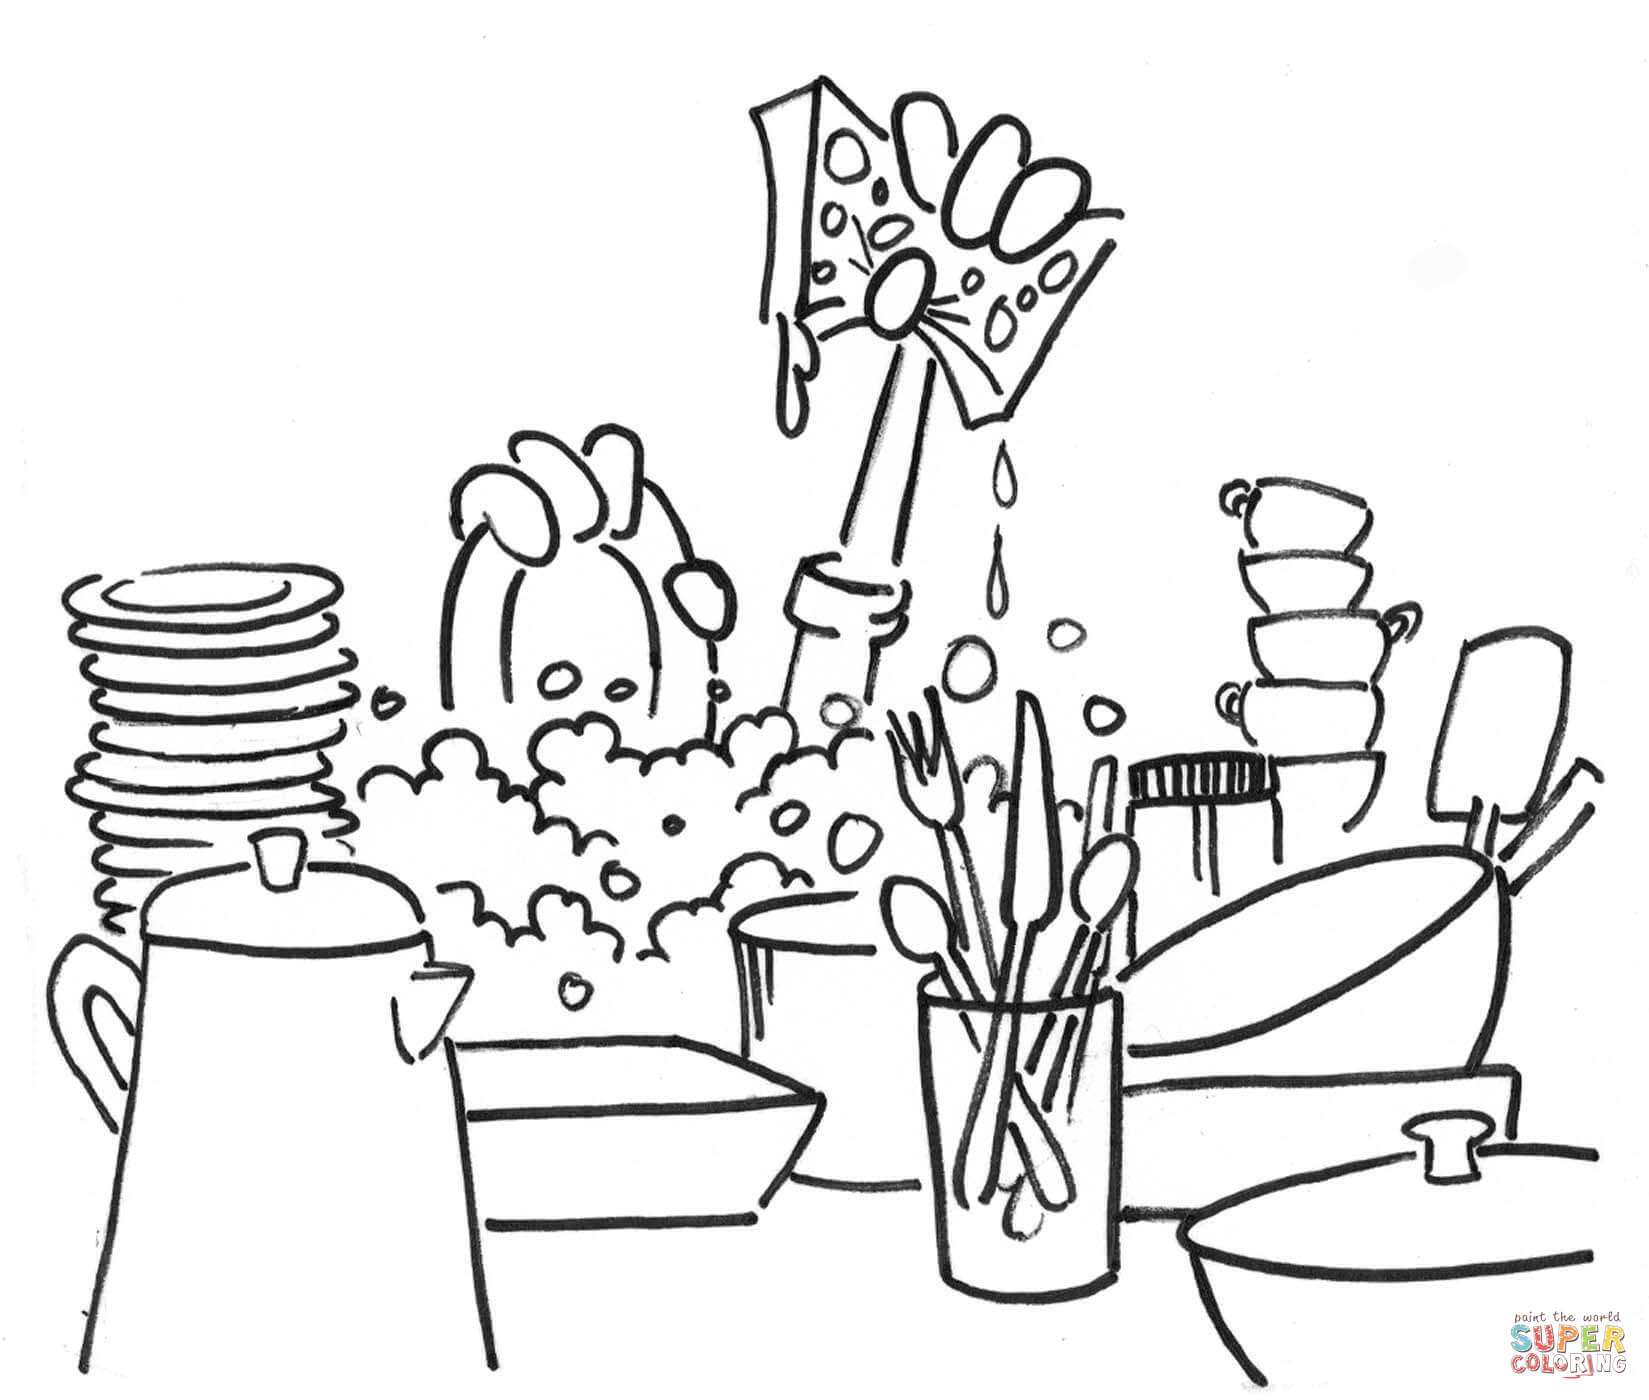 Washing Dishes coloring page | Free Printable Coloring Pages